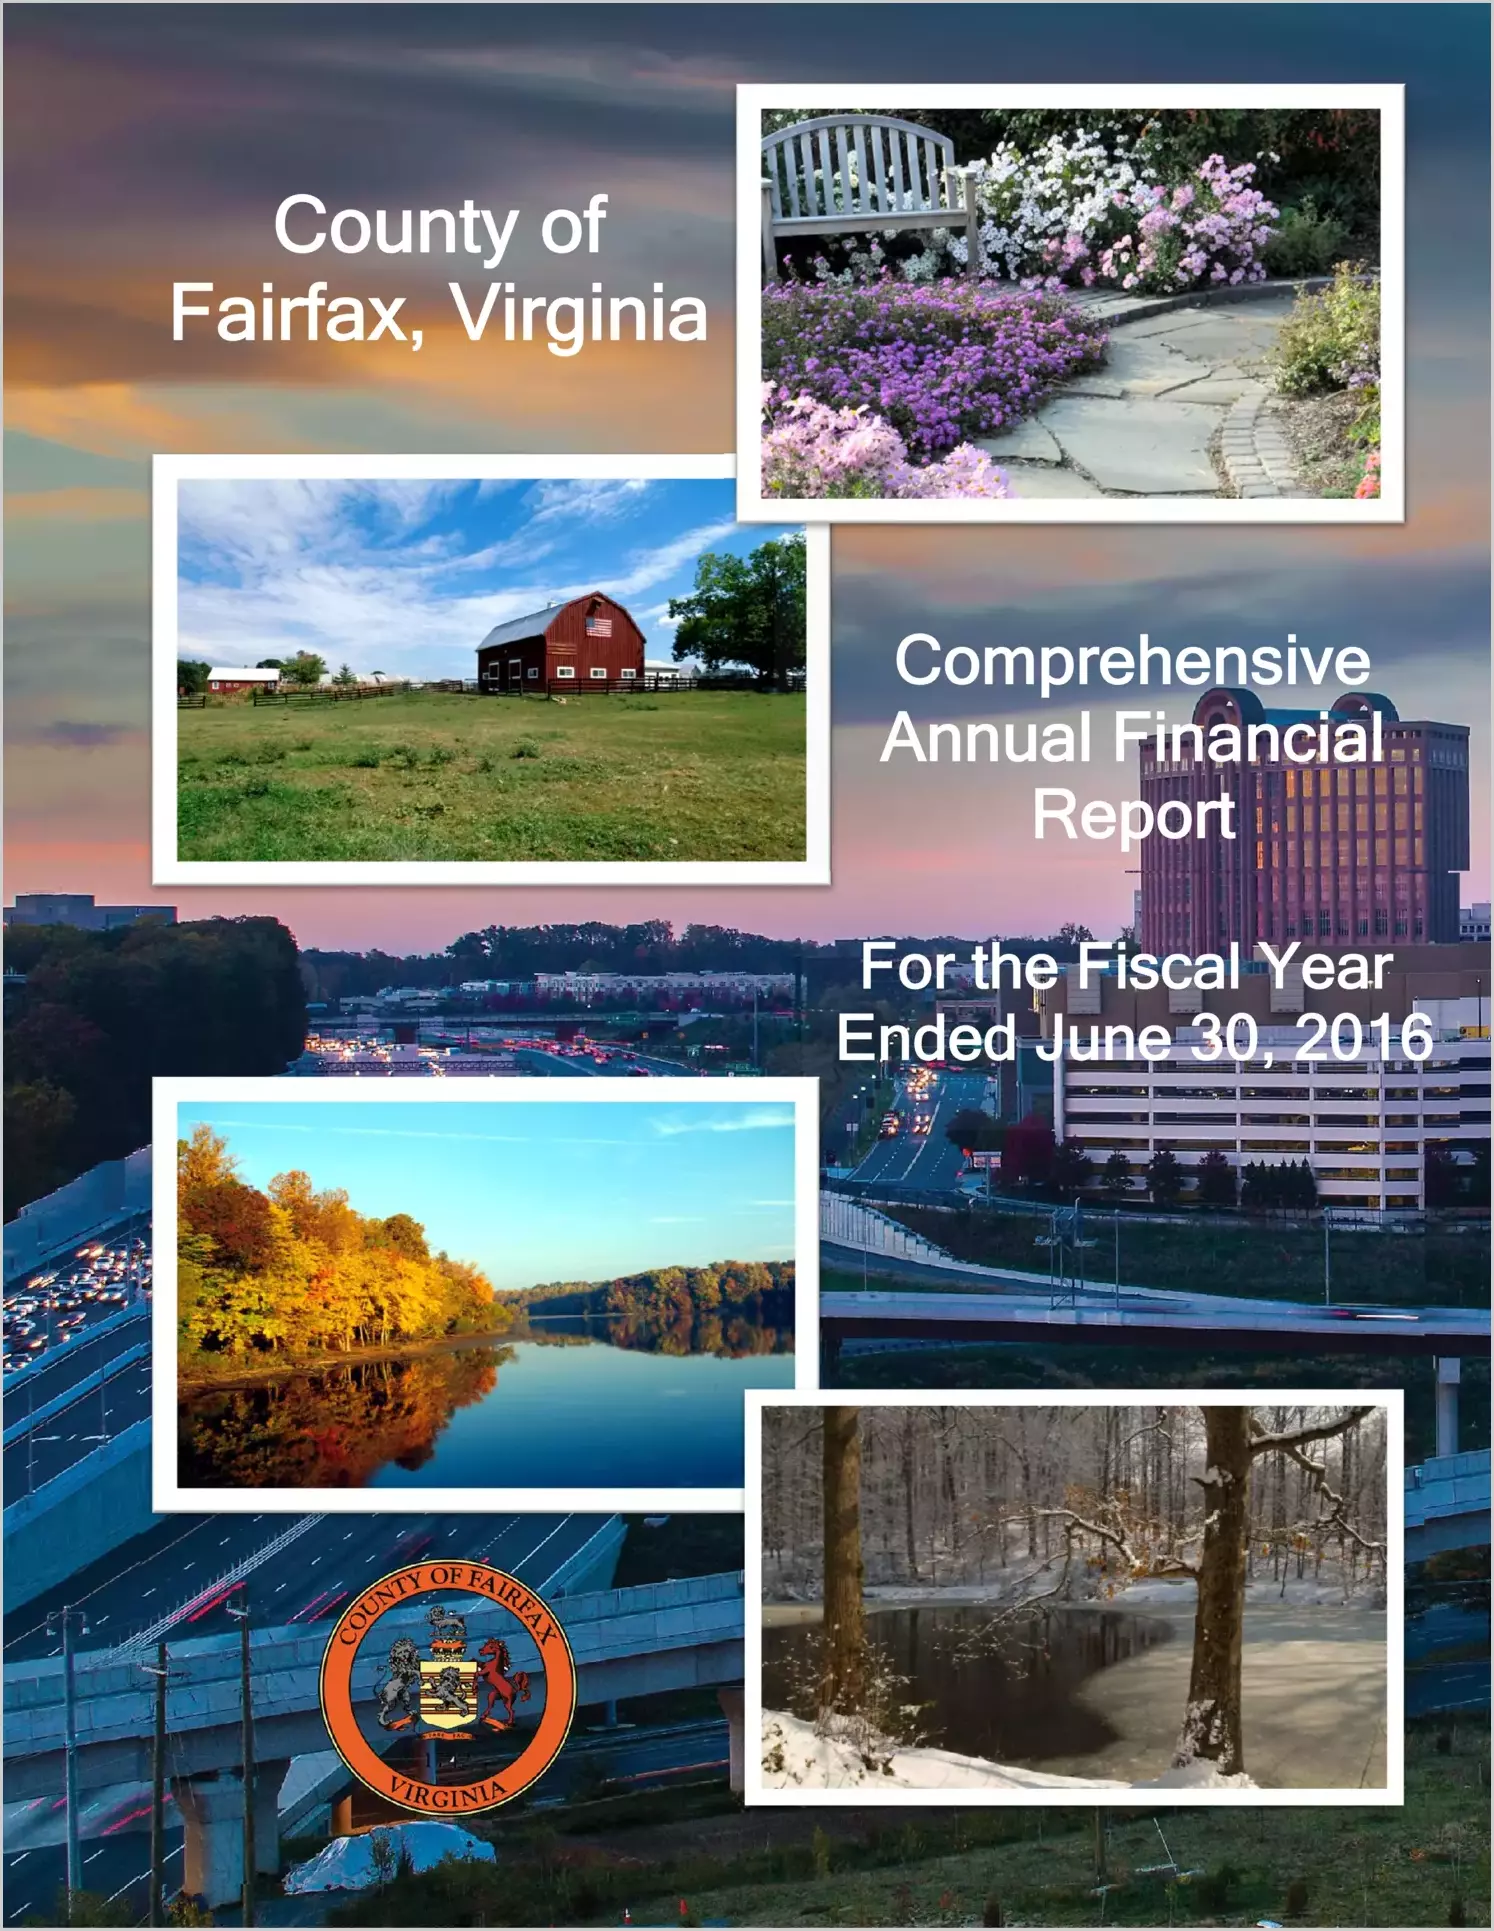 2016 Annual Financial Report for County of Fairfax